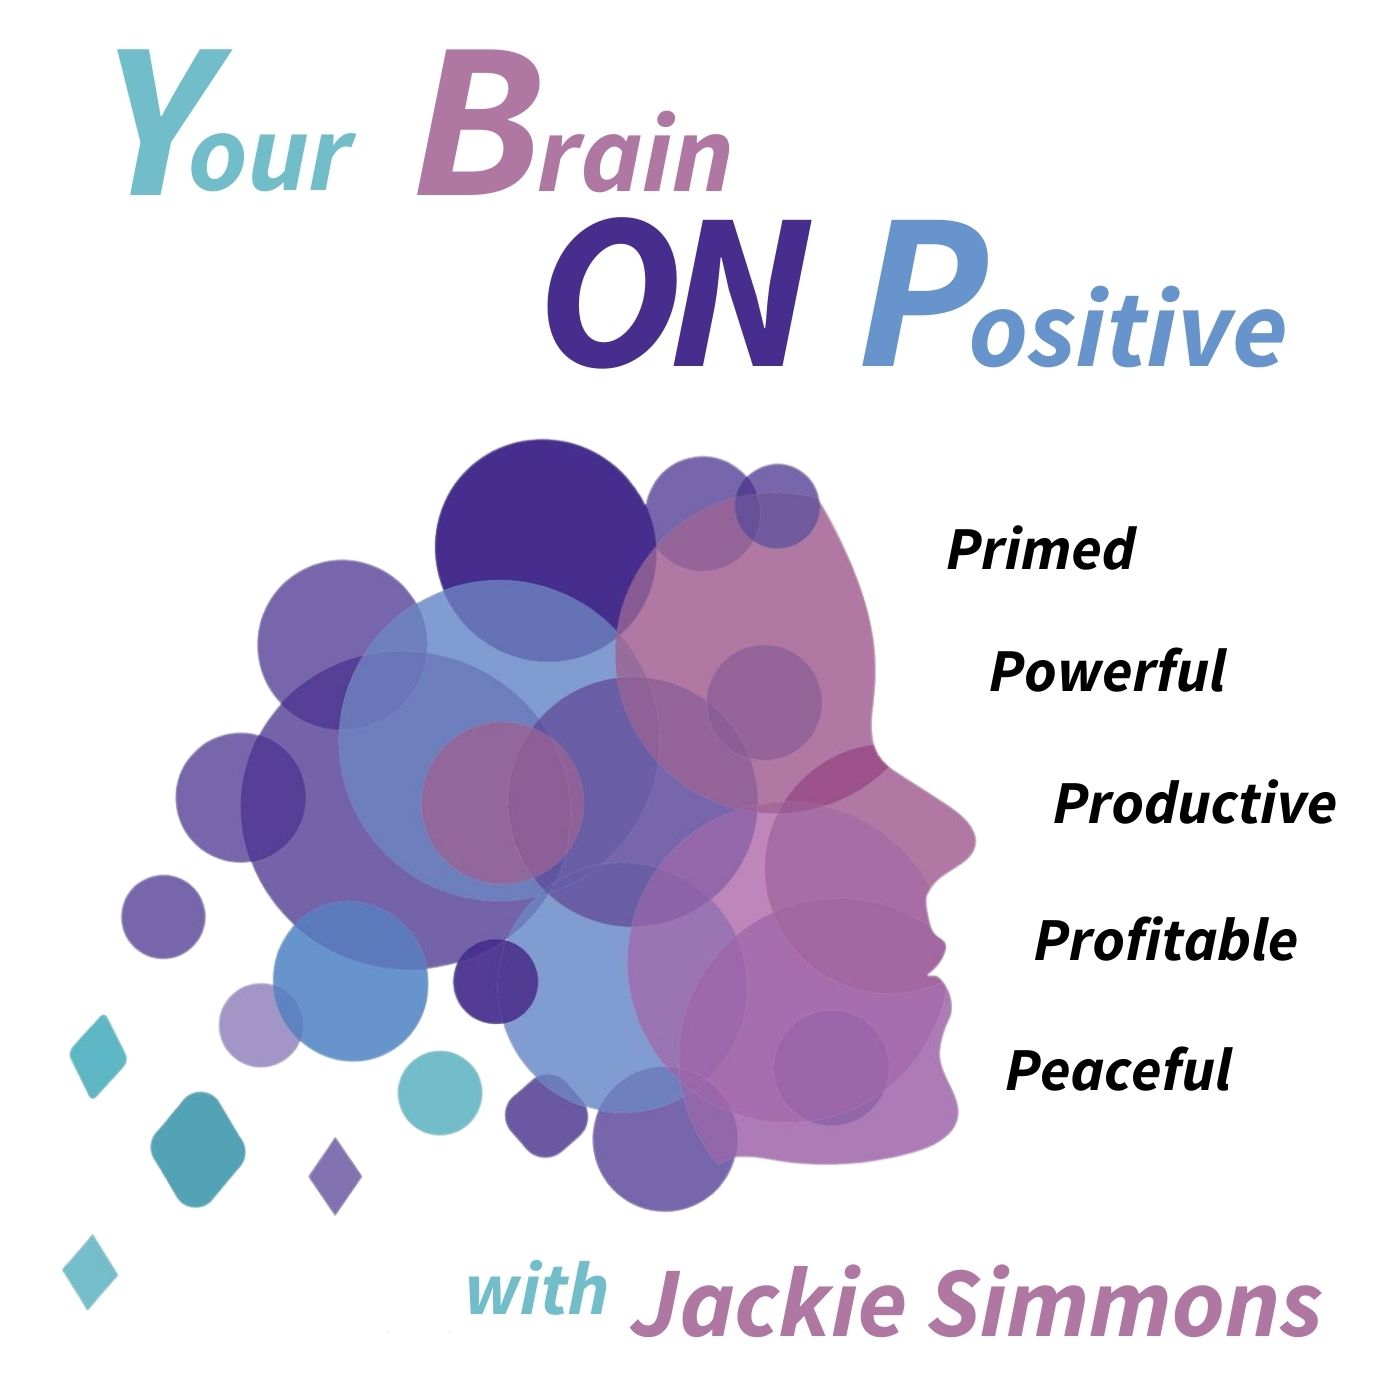 Your Brain ON Positive with Jackie Simmons Album Art